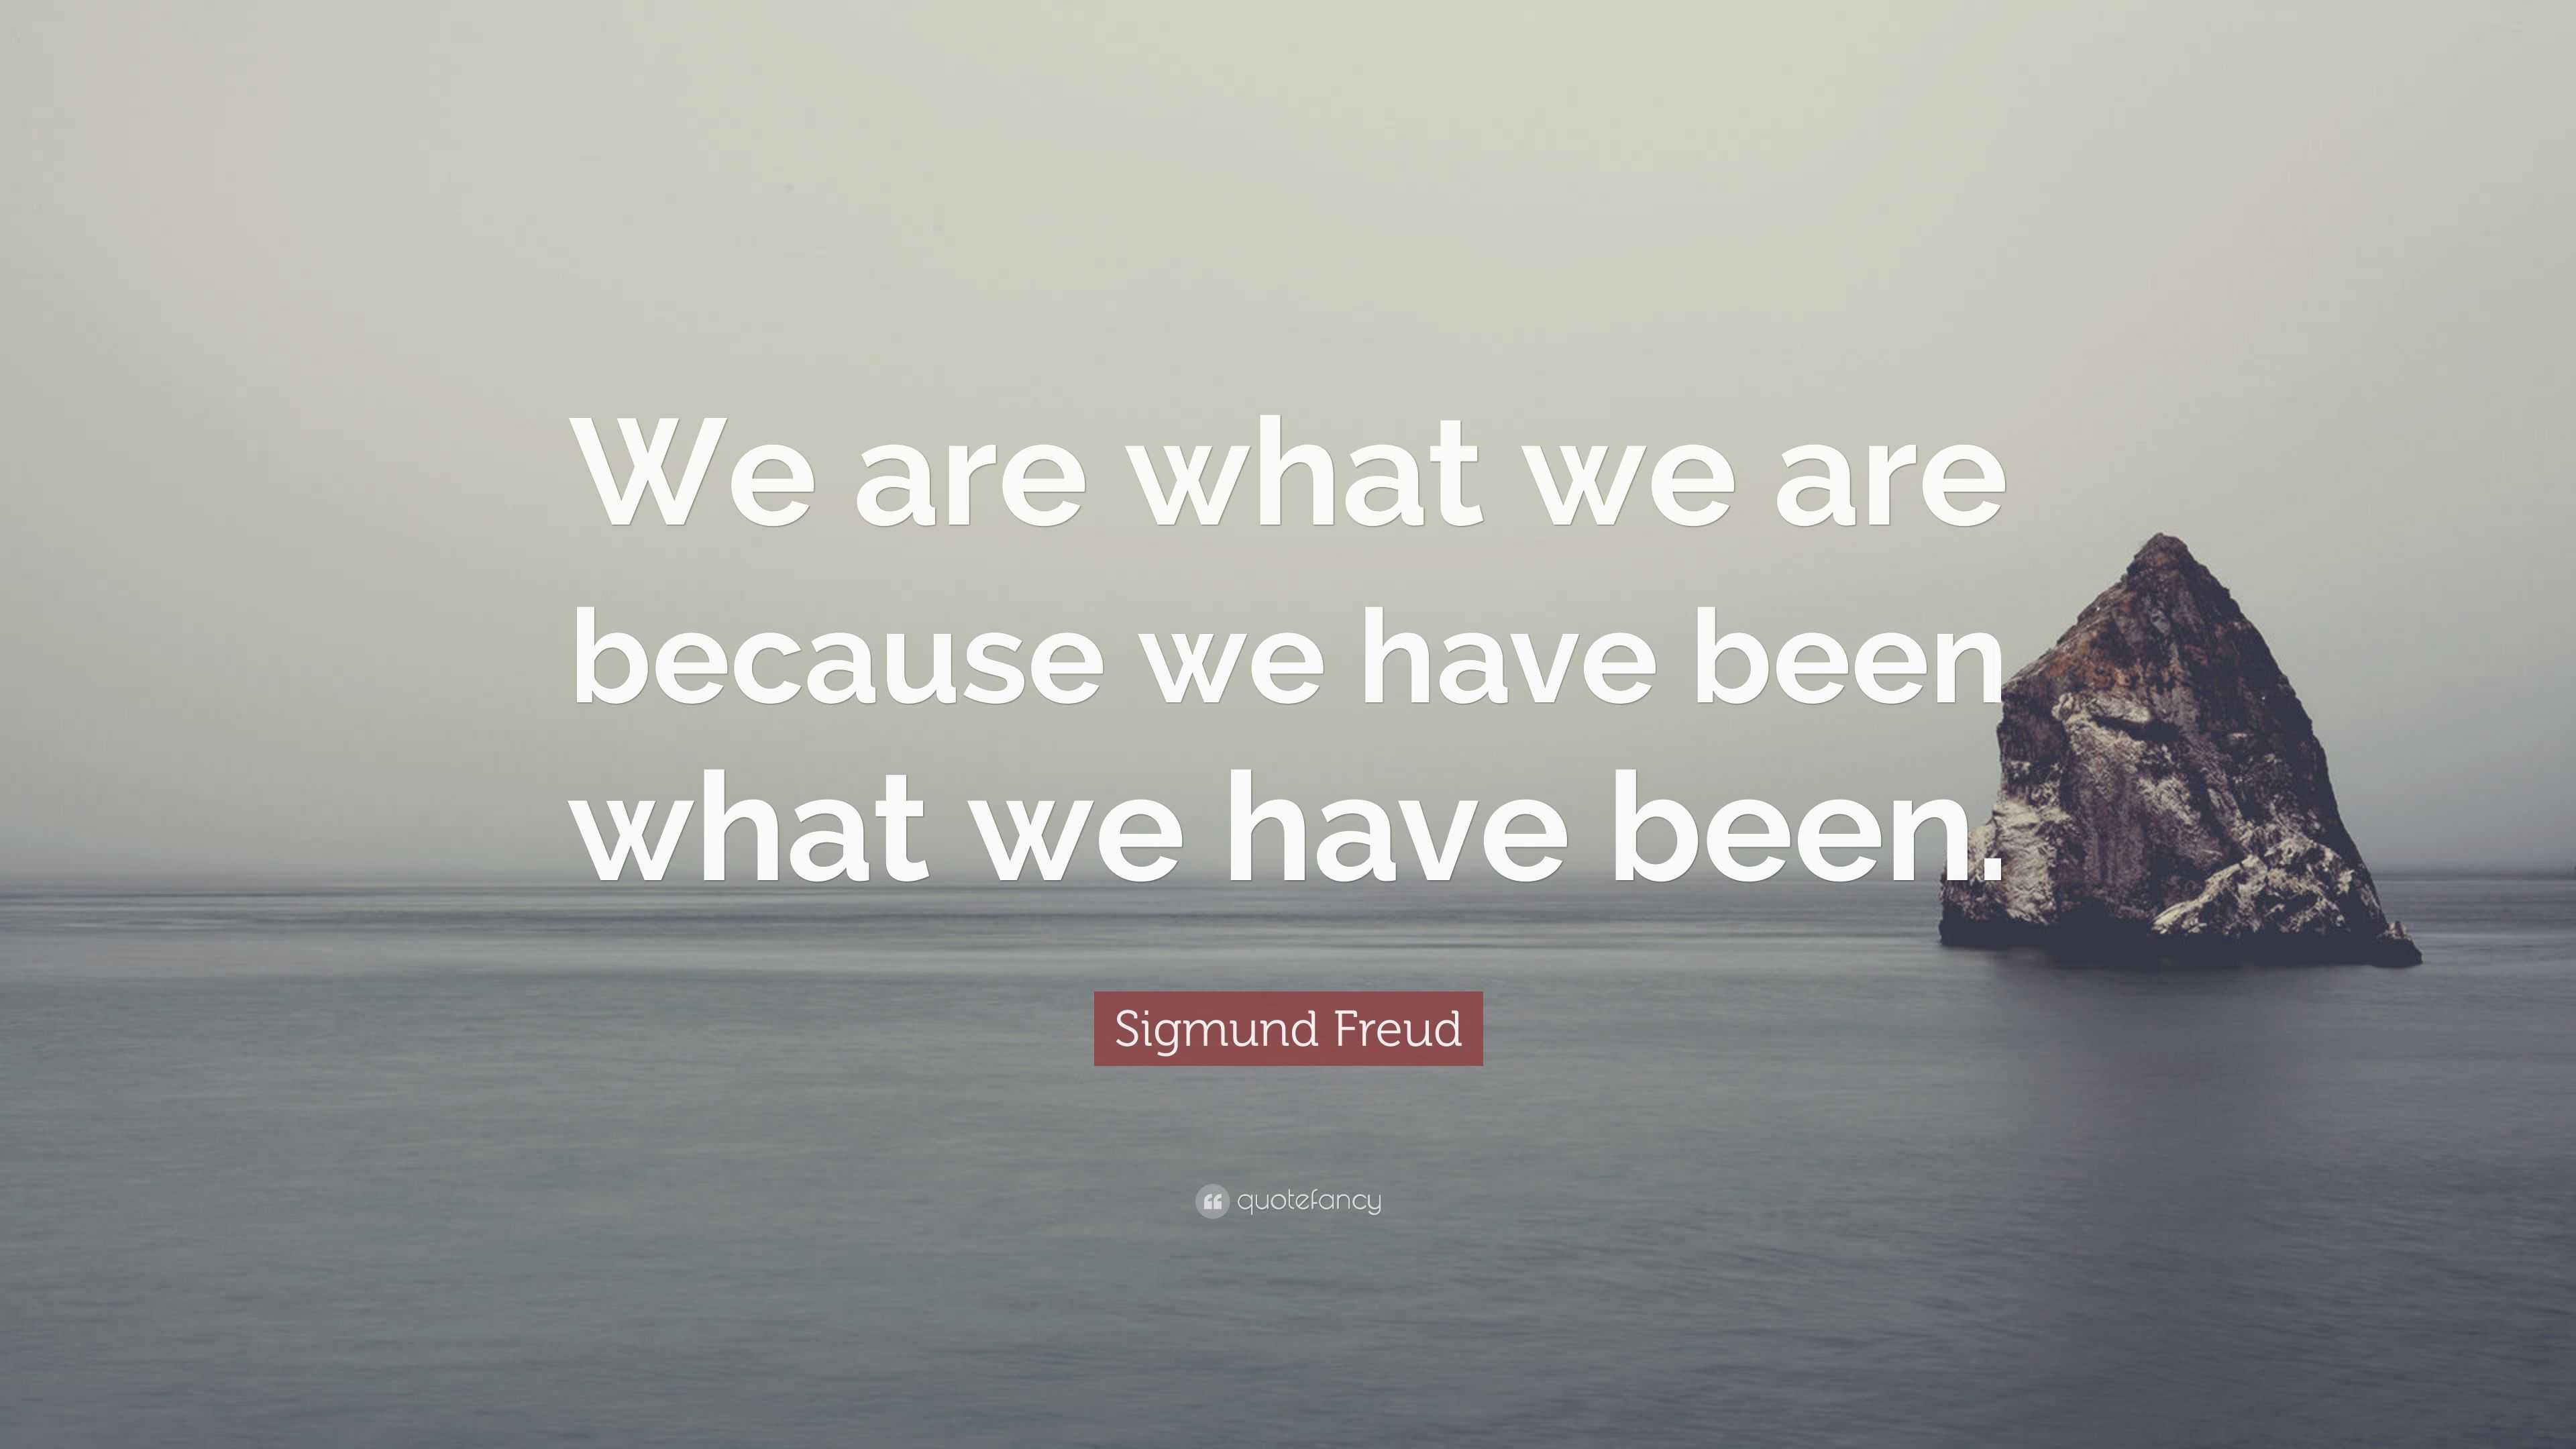 Sigmund Freud Quote: “We are what we are because we have been what we ...